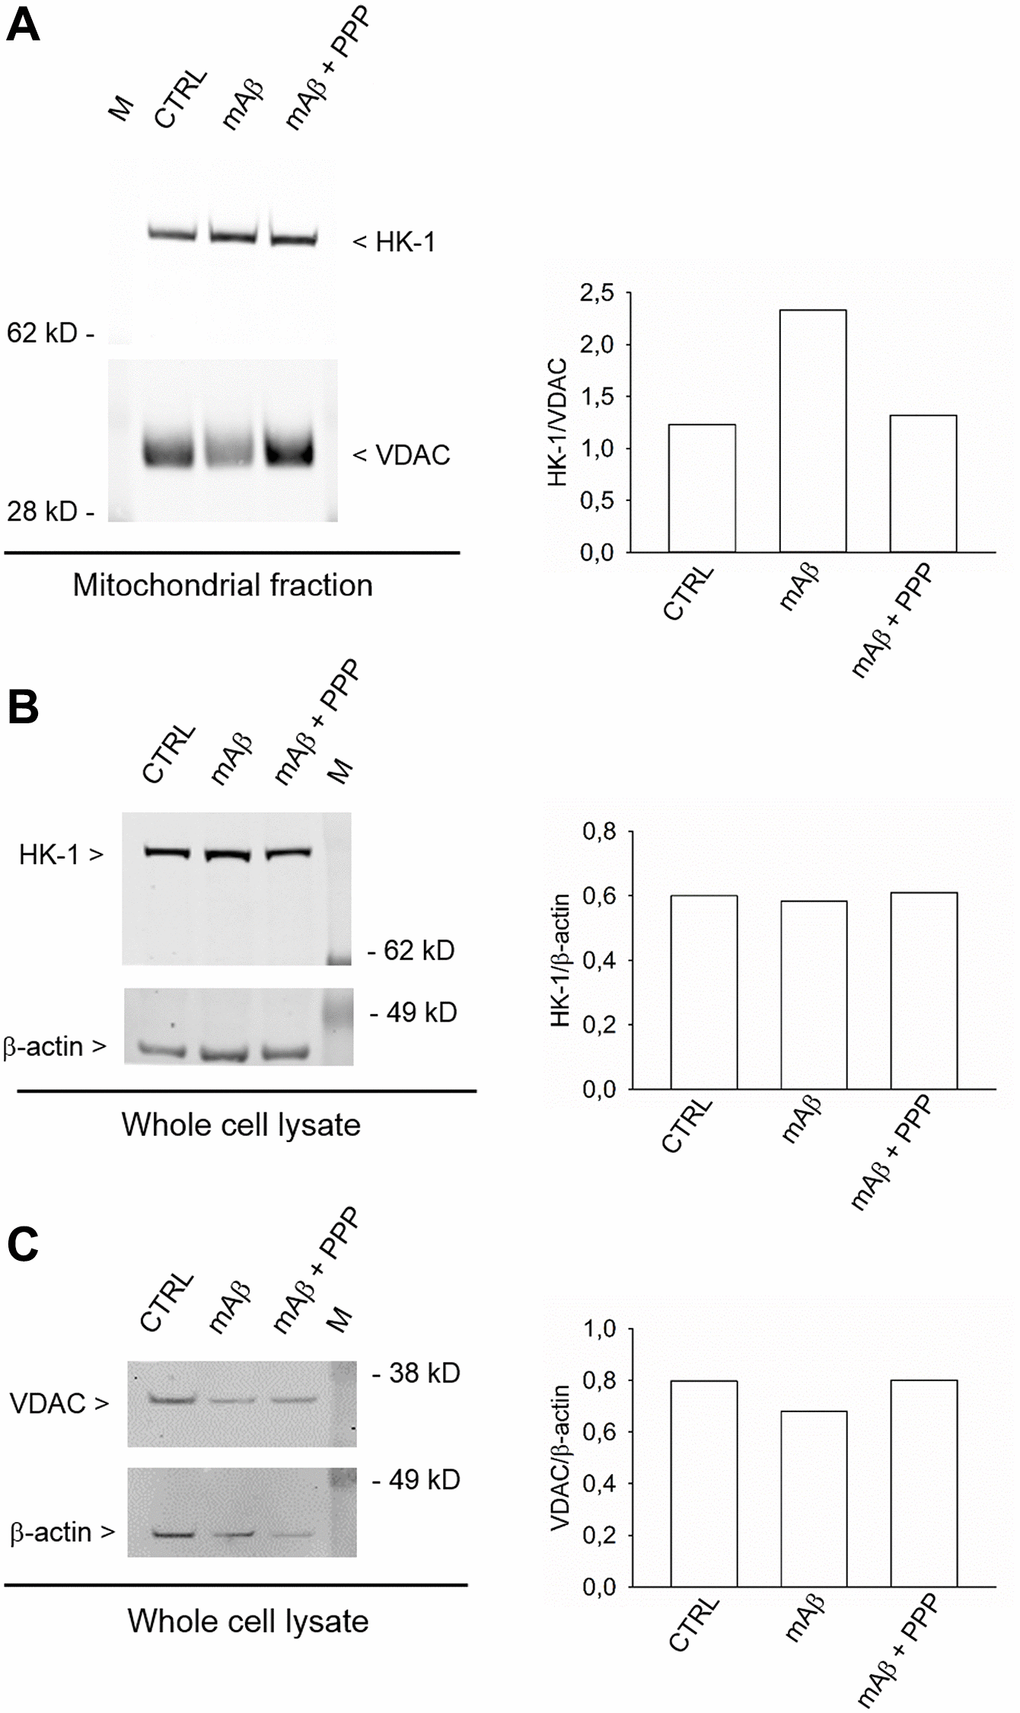 Synthetic Aβ42 monomers enhanced the mitochondrial abundance of HK-1 without altering the total protein content. In (A), the western blot analysis of HK-1 in the mitochondrial fraction of neurons that, following glucose deprivation and replenishing, were exposed to Aβ42 monomers in the absence (mAβ, 100 nM for 40 min) and in the presence of 500 nM PPP (mAβ ± PPP). Densitometric values of HK-1, normalized on VDAC signals, are represented in the graph bars (right). In (B and C), the western blot analysis of HK-1 and VDAC, respectively, in the whole neuronal lysate. Densitometric values of HK-1 or VDAC, normalized on β-actin signals, are represented in the respective graph bars (right). The whole cell lysate and the mitochondrial fraction were derived from the same experiment, but proteins were loaded in different amounts/gel (15 μg in (A), 20 μg in (B) and 10 μg in (C)) to avoid the saturation of hybridization signals. The experiment was repeated twice with similar results. Hybridization signals were detected with the Odyssey infrared imaging system in their original green or red colors and automatically converted into greyscale. M = protein marker.